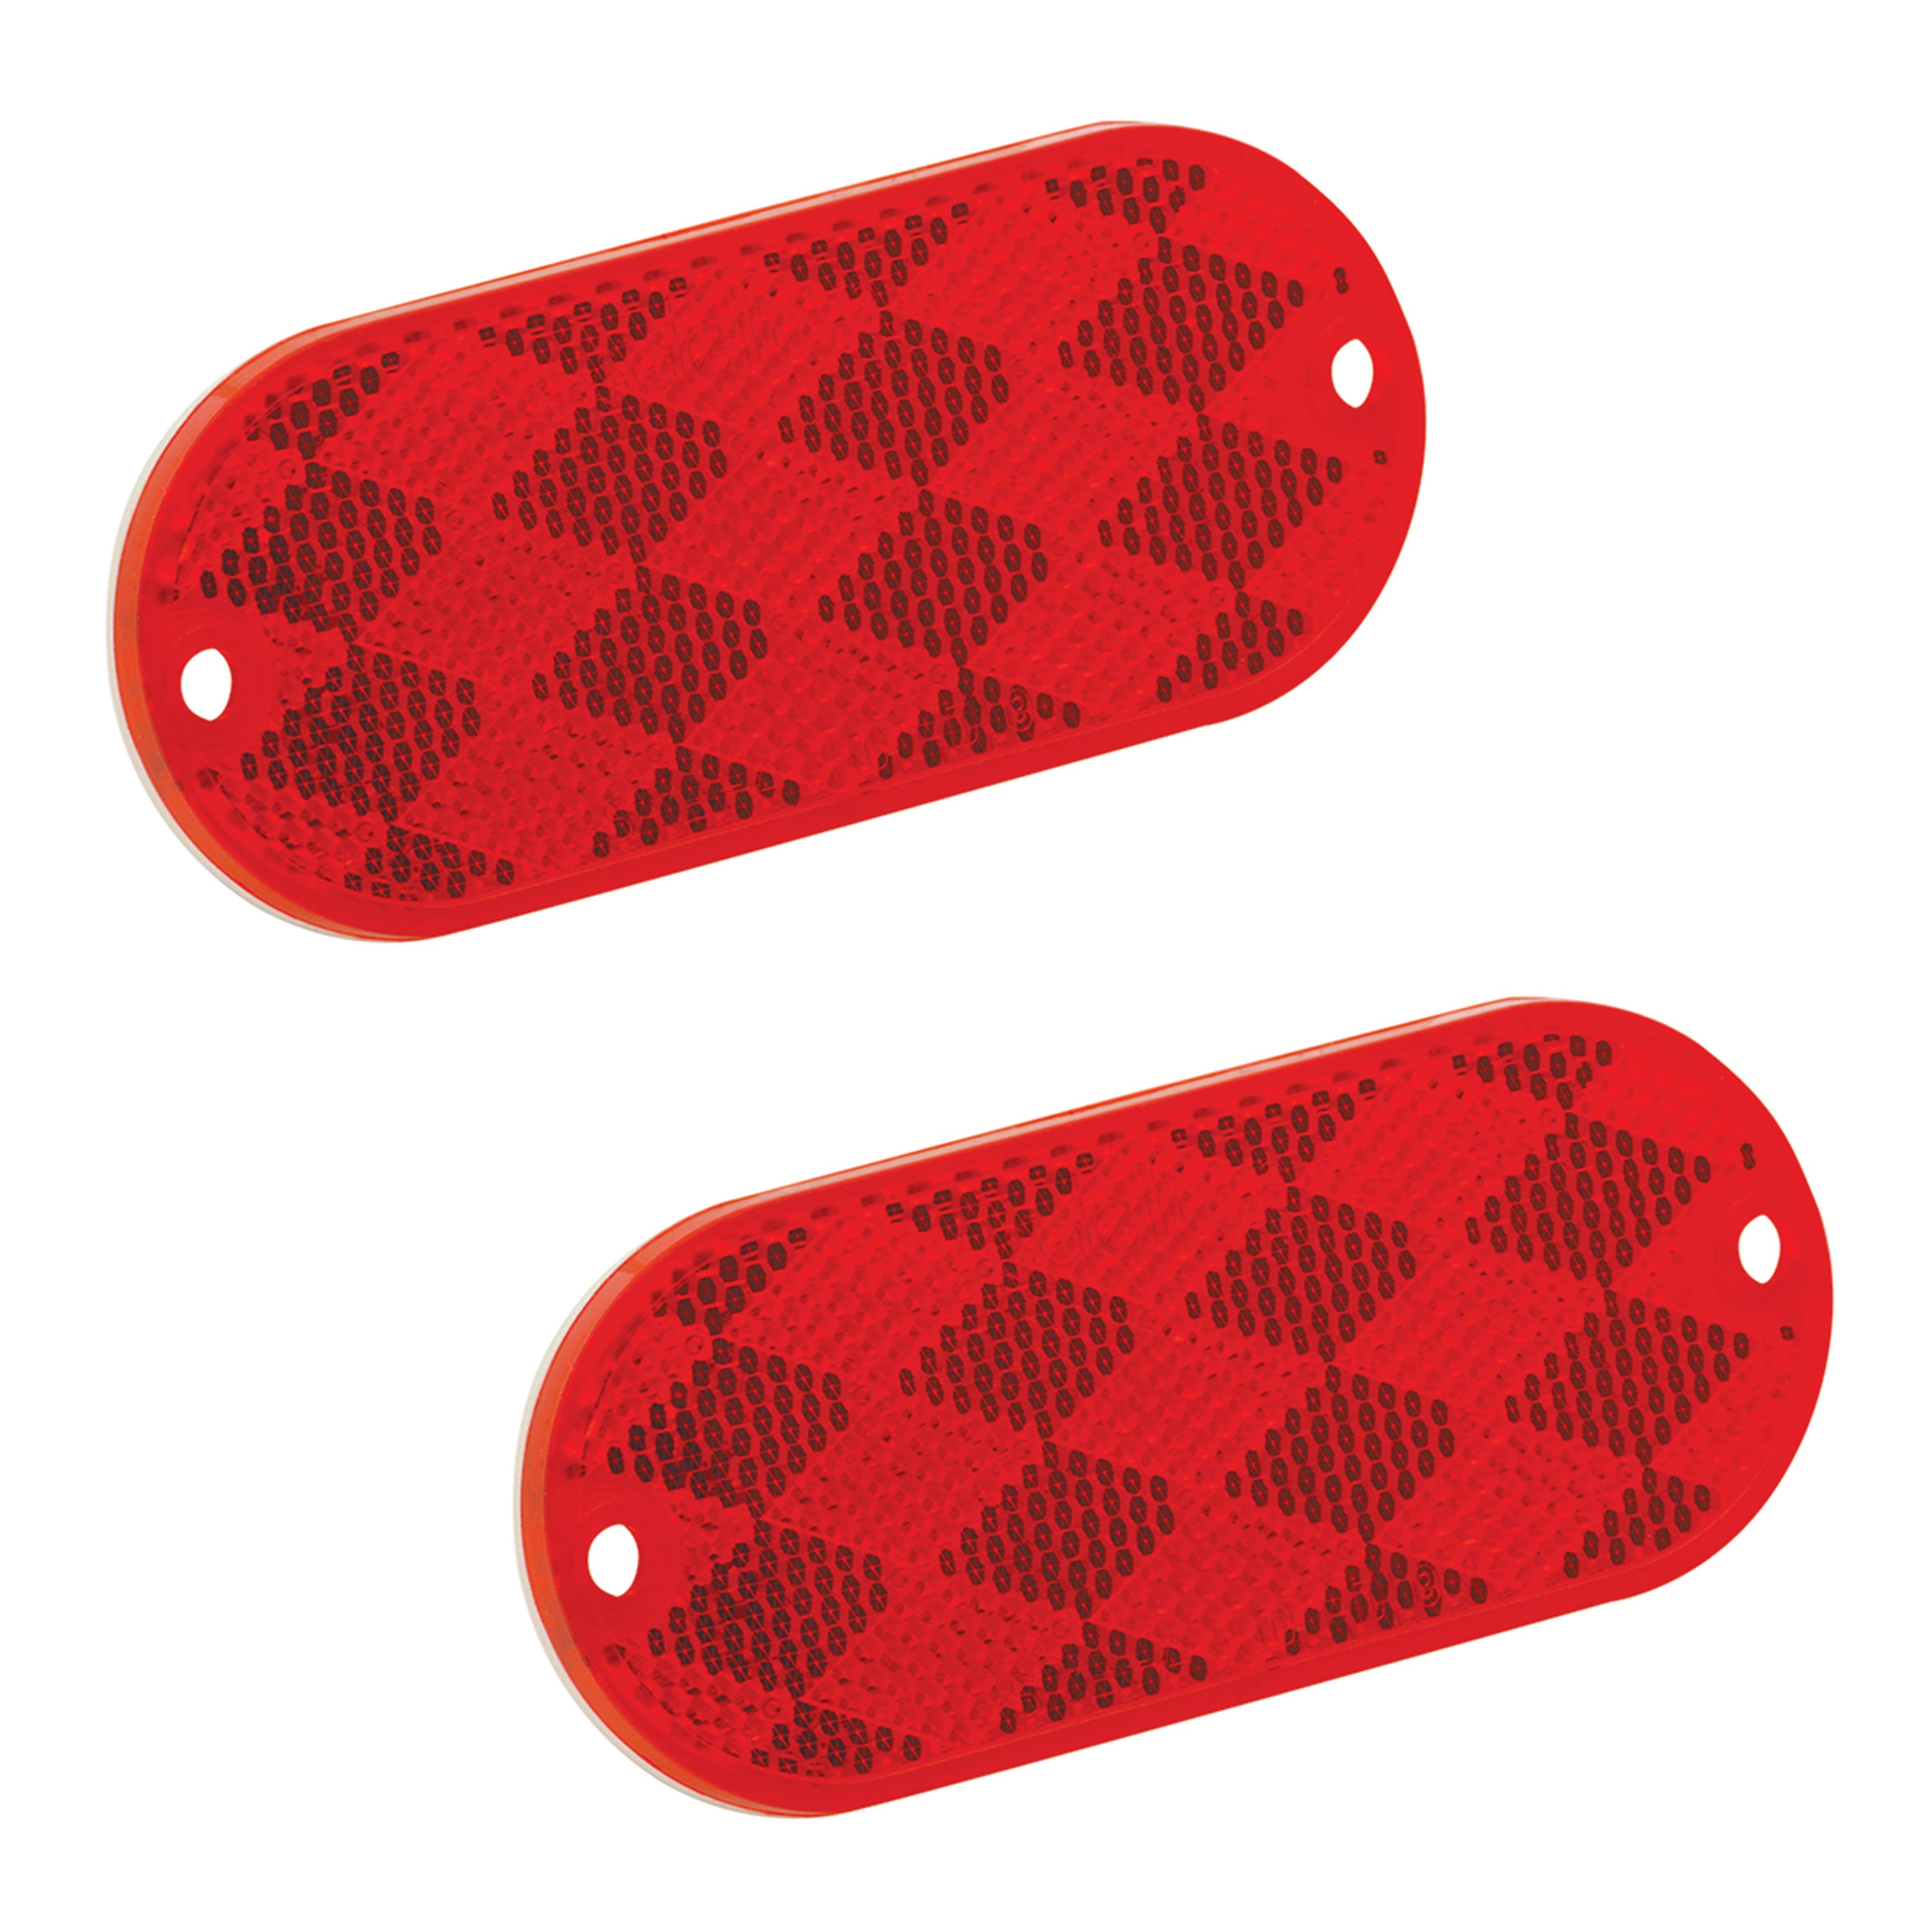 Bargman 71-78-010 Oblong Adhesive Reflector - Red, 3-1/4" x 1-1/2"